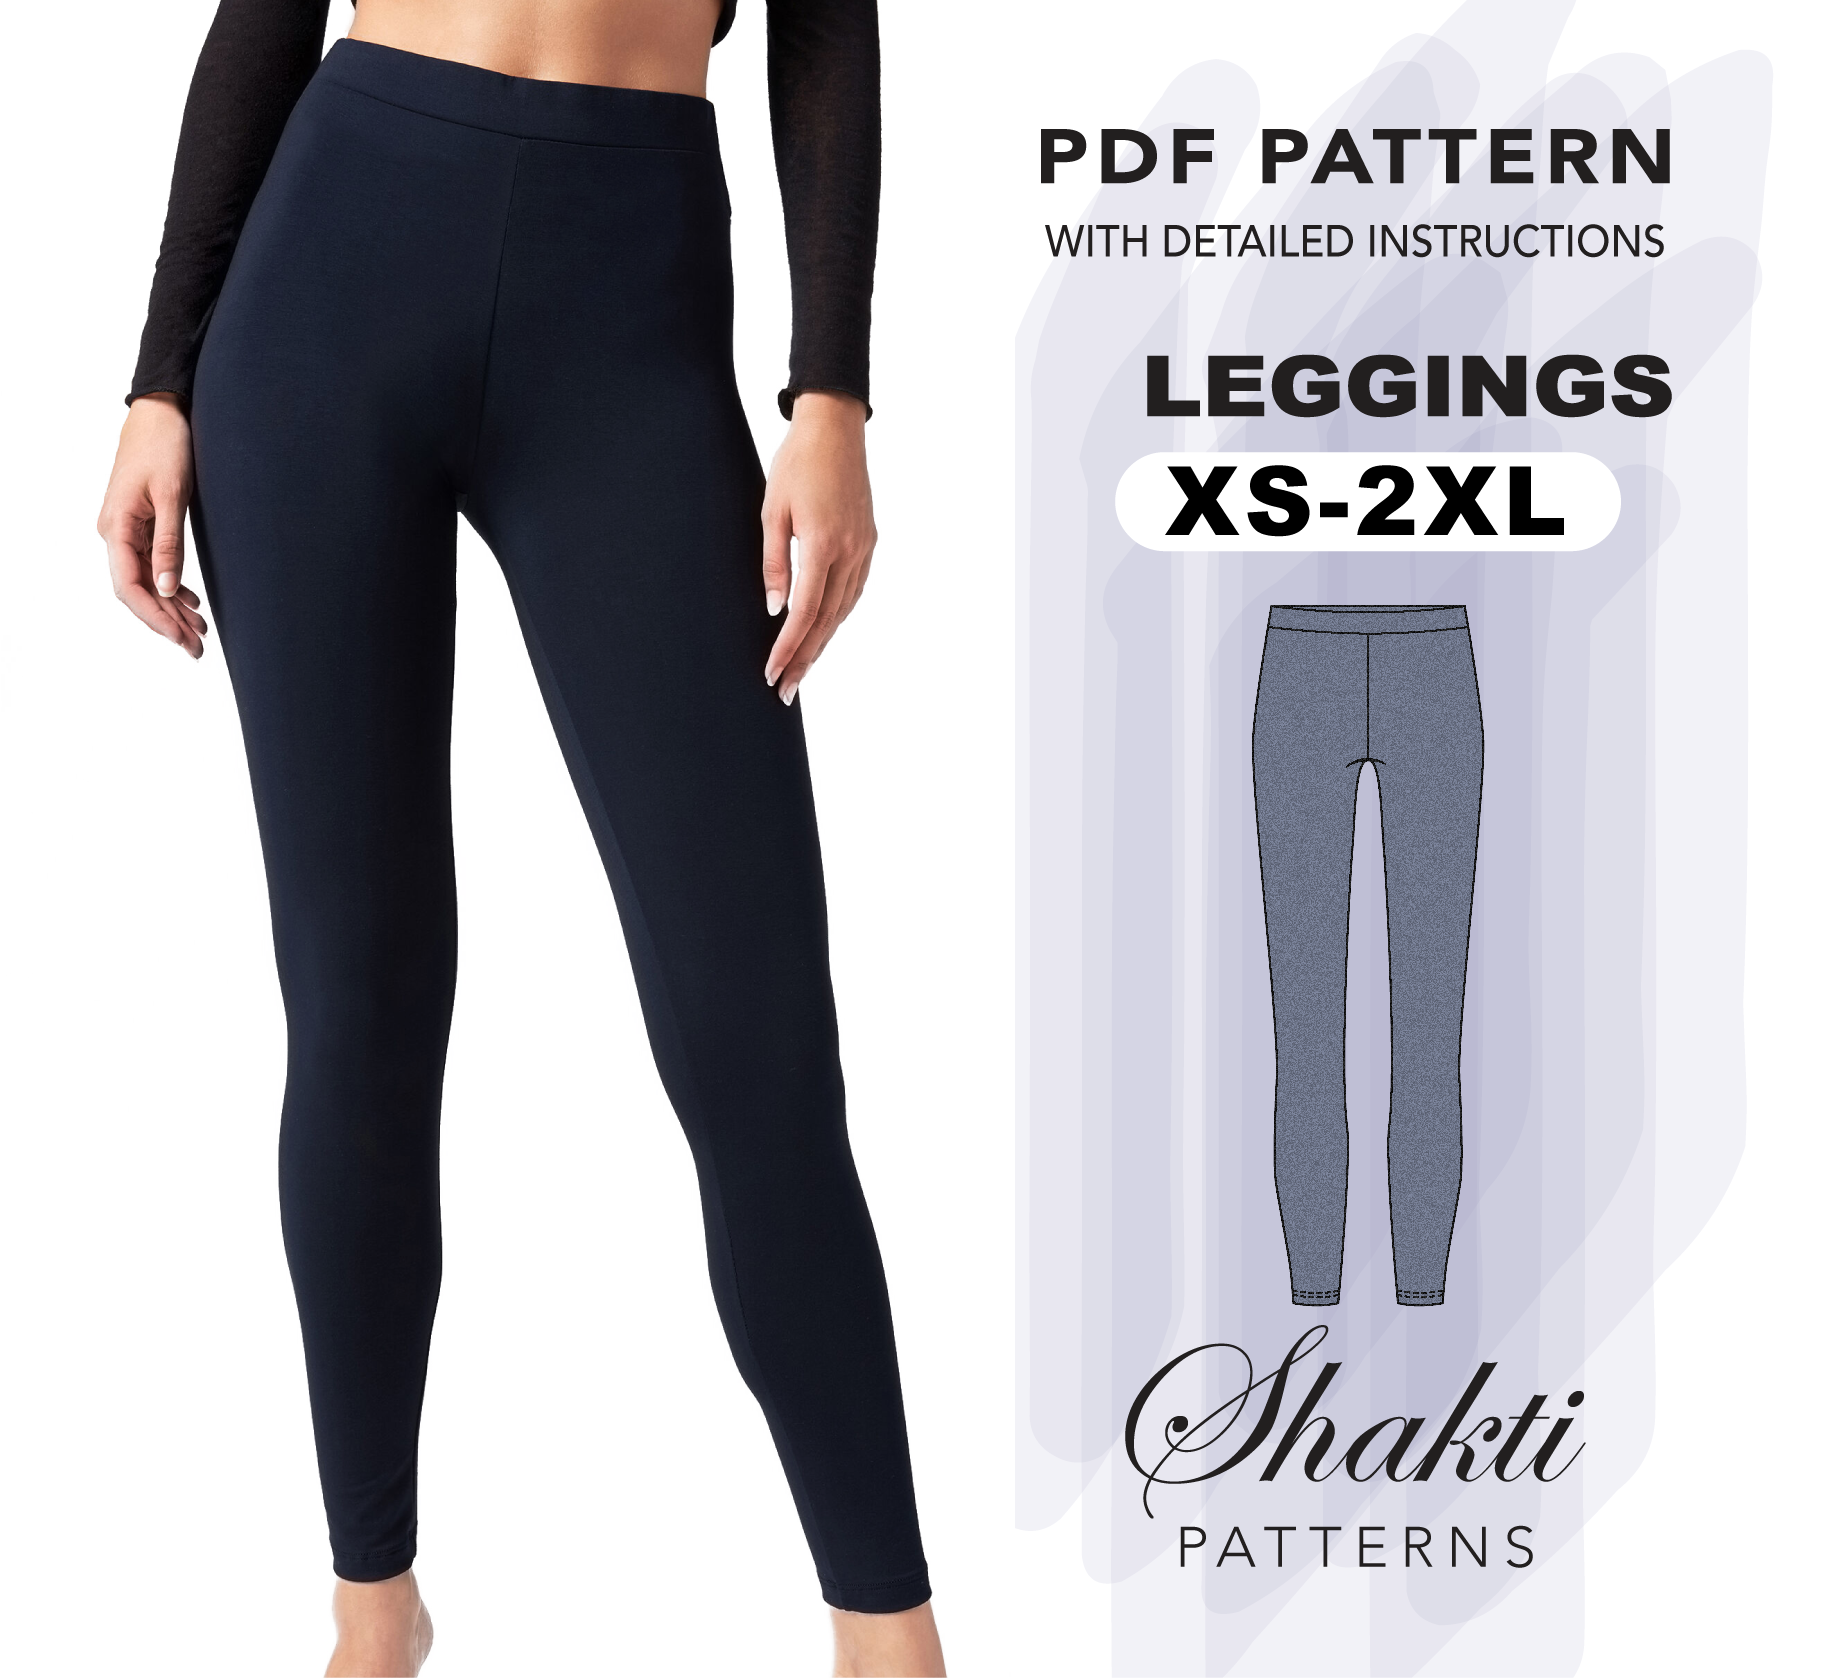 The Best Leggings Sewing Patterns for Girls and Women - Cucicucicoo